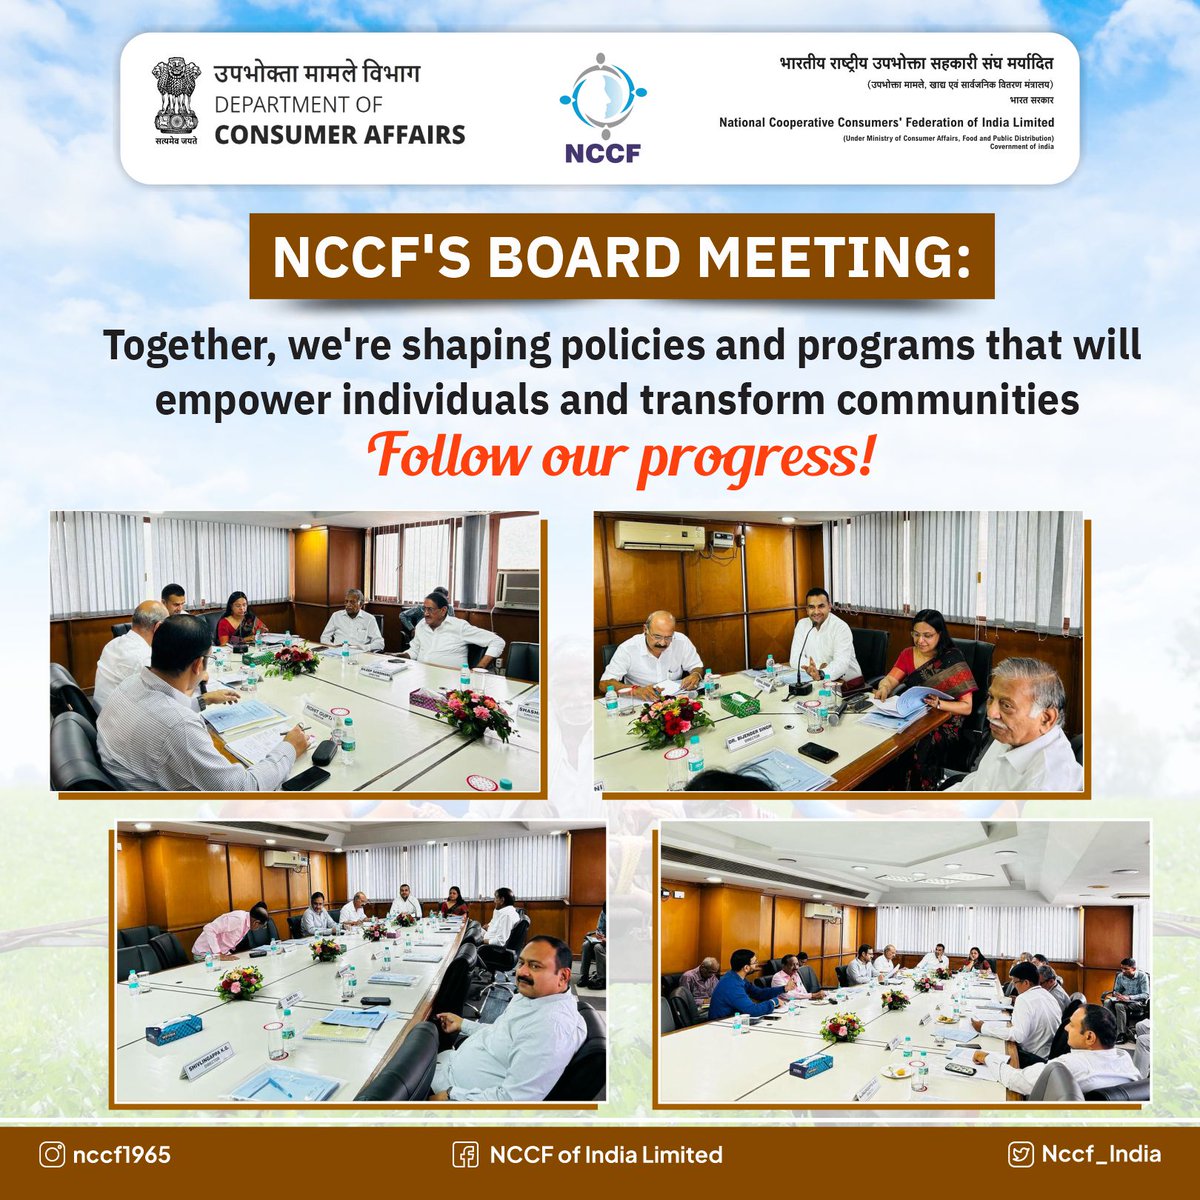 It's a pivotal day at NCCF as our Board strategizes to amplify our impact and drive positive change. #BoardMeeting #progress #EmpowerTheFuture #Boards #nccf